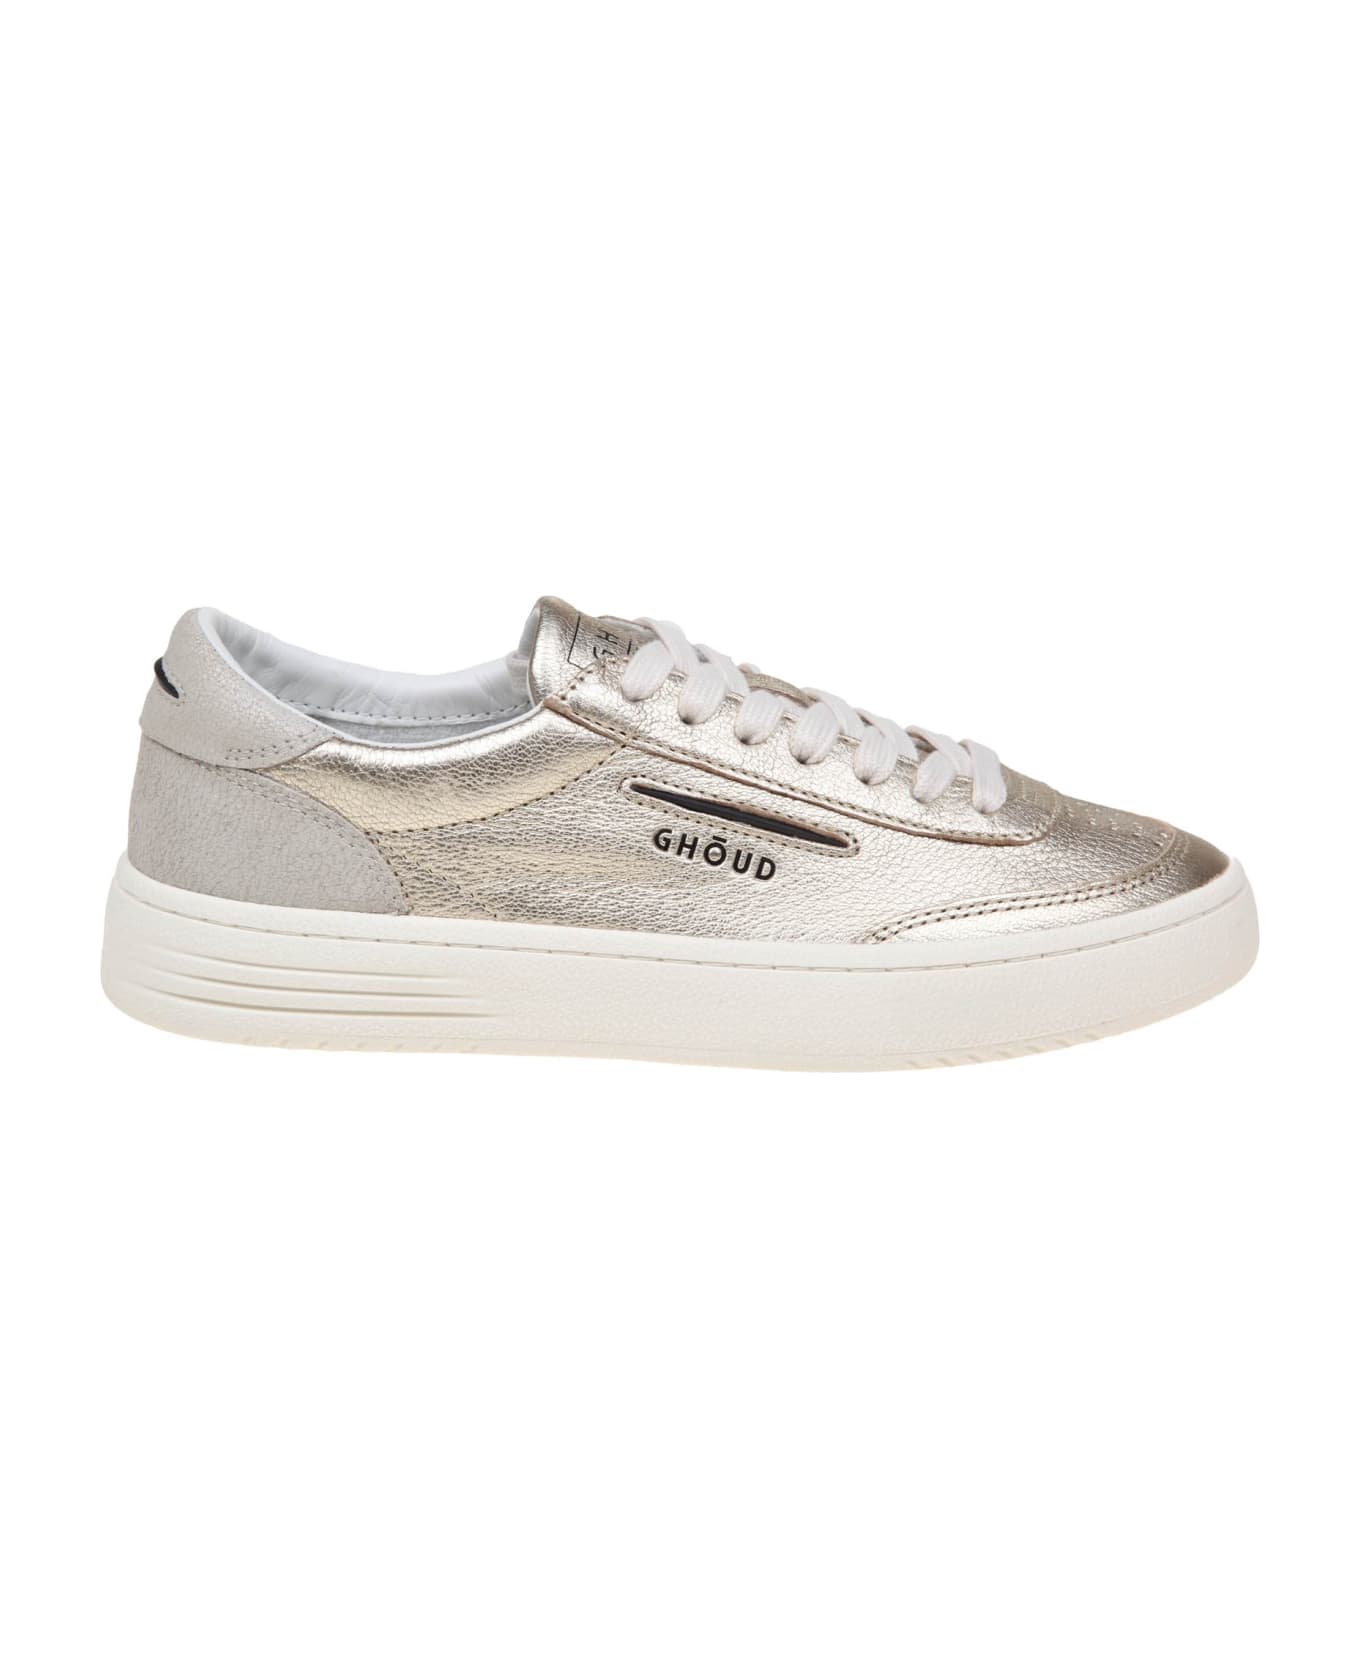 GHOUD Lido Low Sneakers In Platinum Color Leather - CRACKLE/MIRROR PLAT